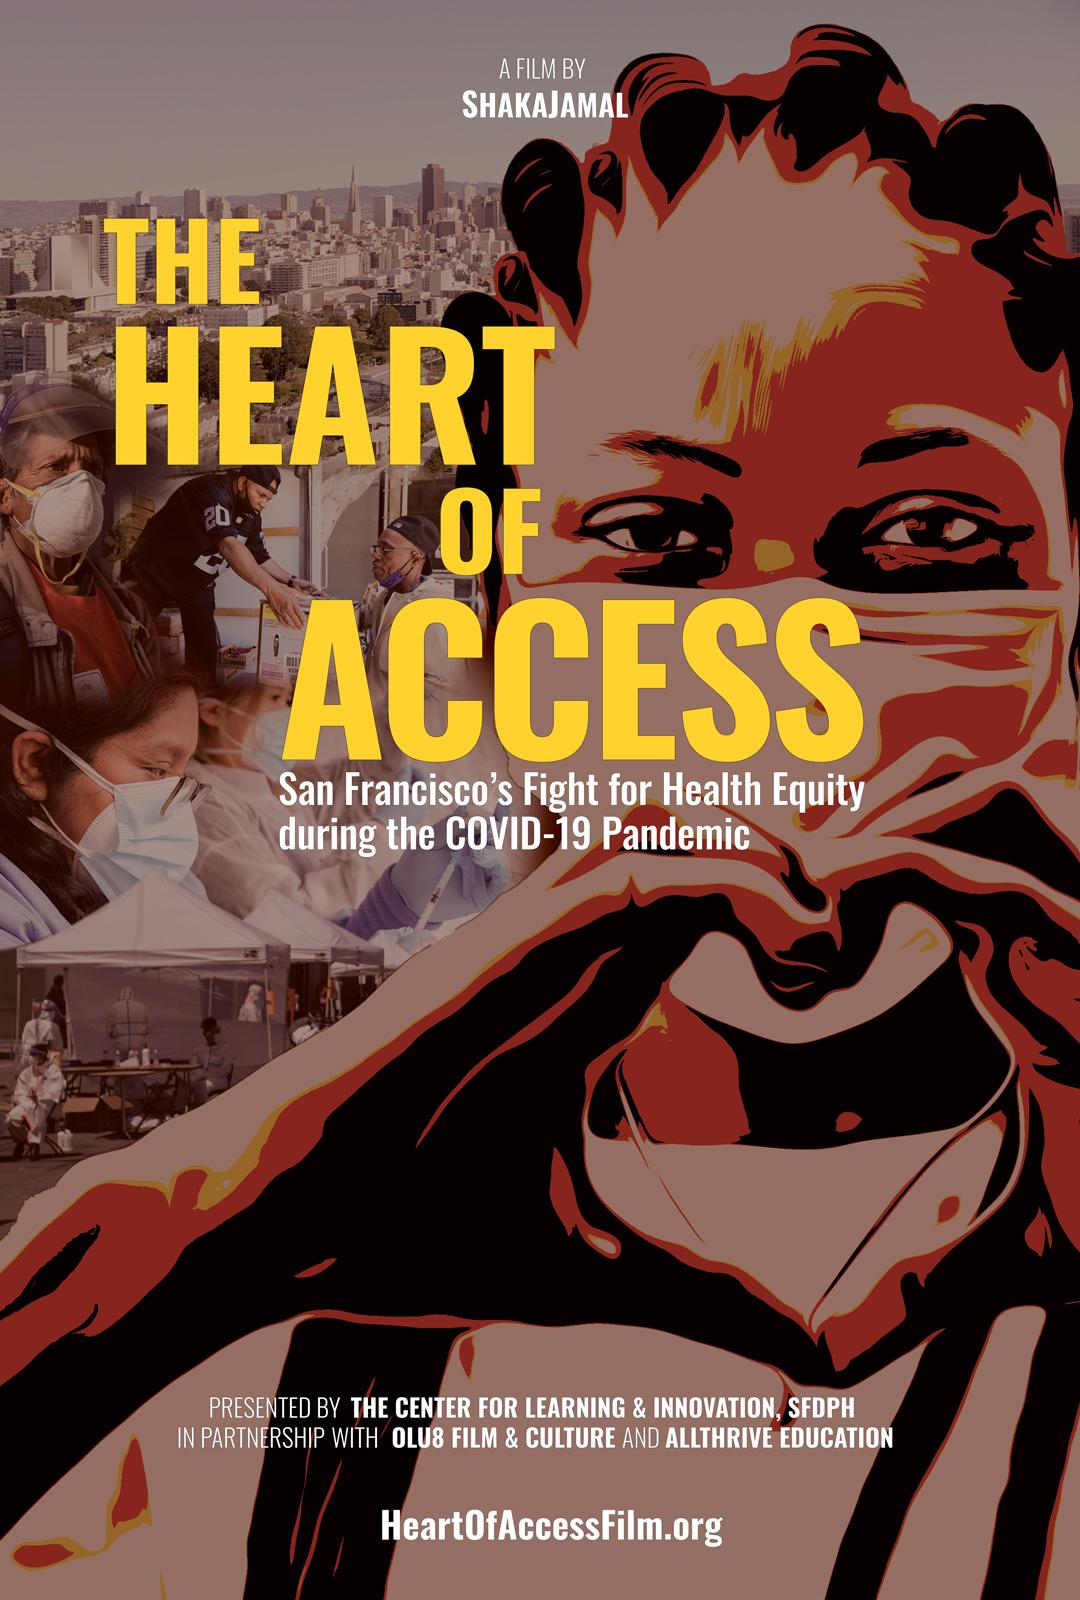 The Heart of Access